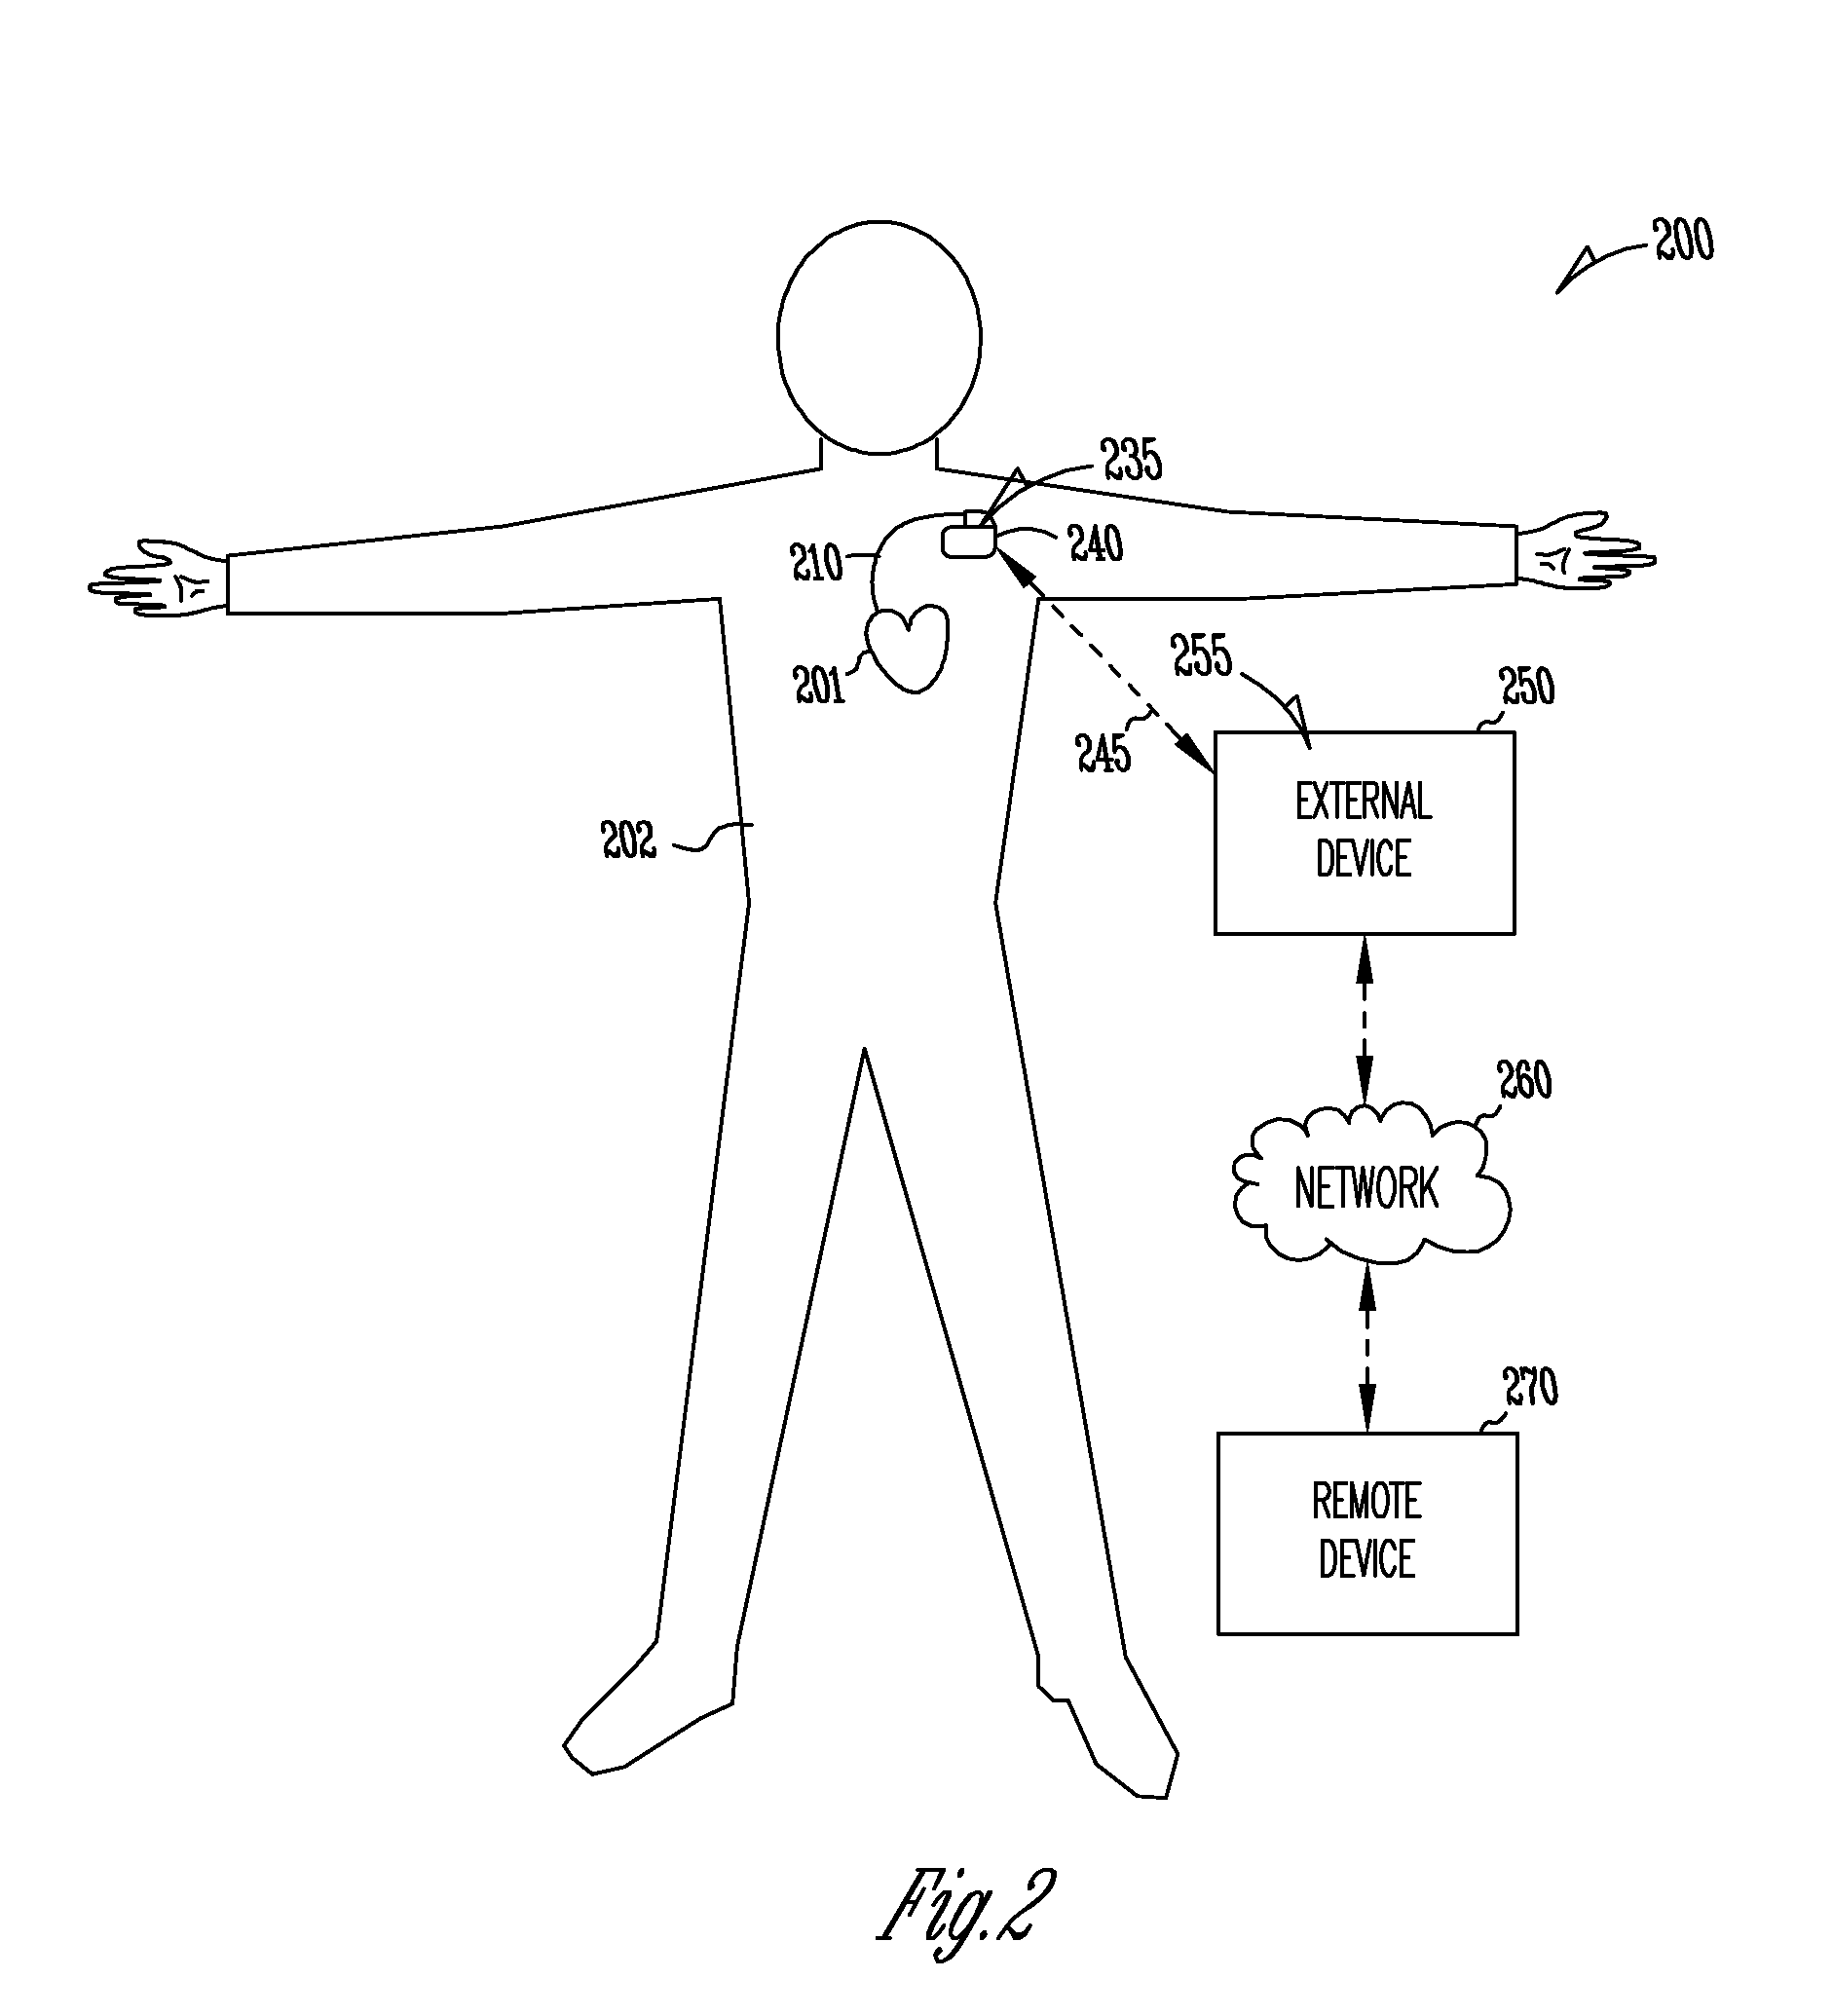 Dynamic device therapy control for treating post myocardial infarction patients